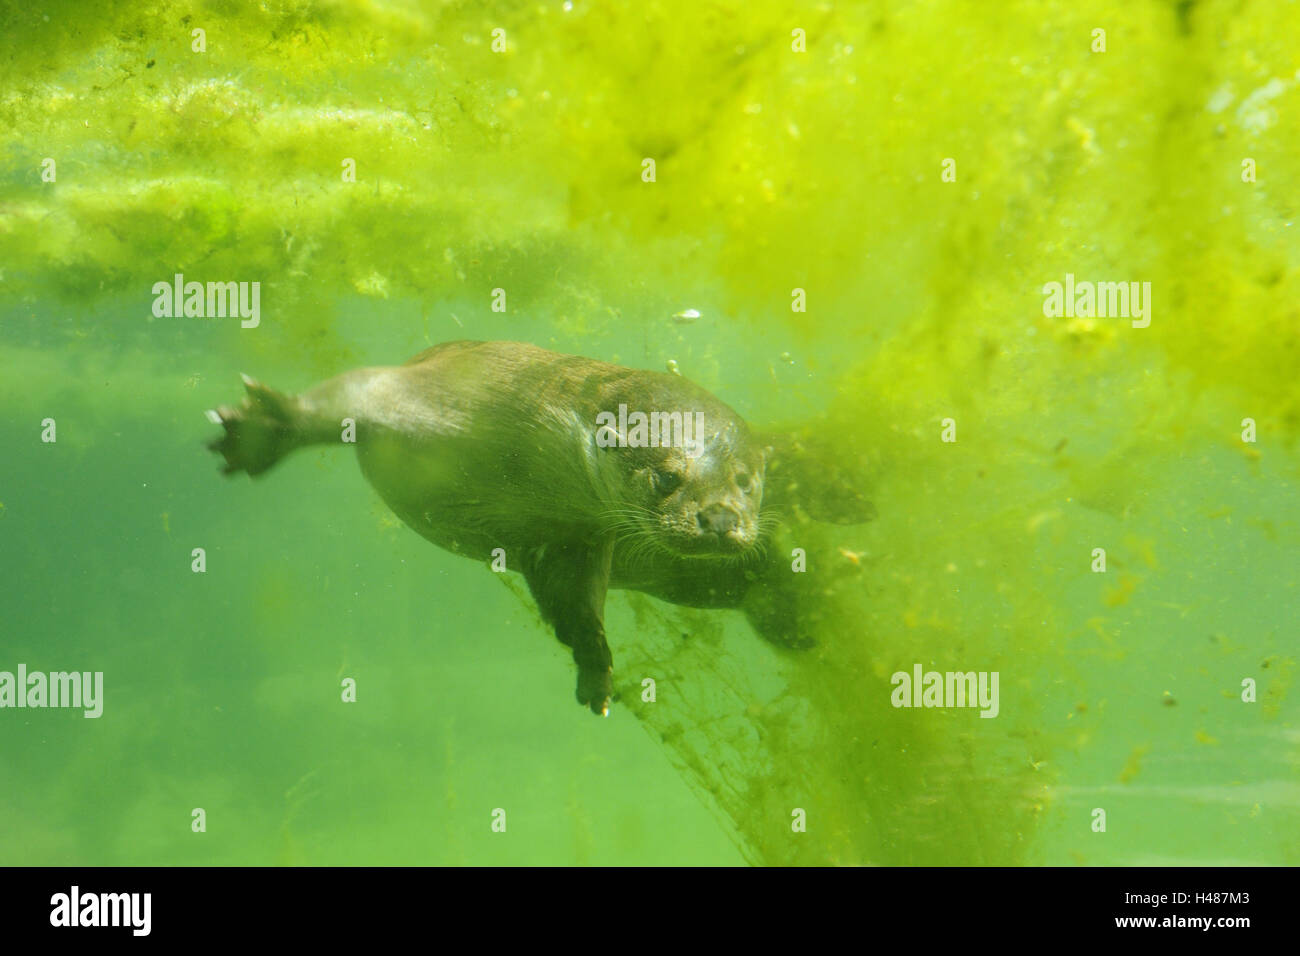 Eurasian otter, Lutra lutra, underwater, dip, view camera, Stock Photo